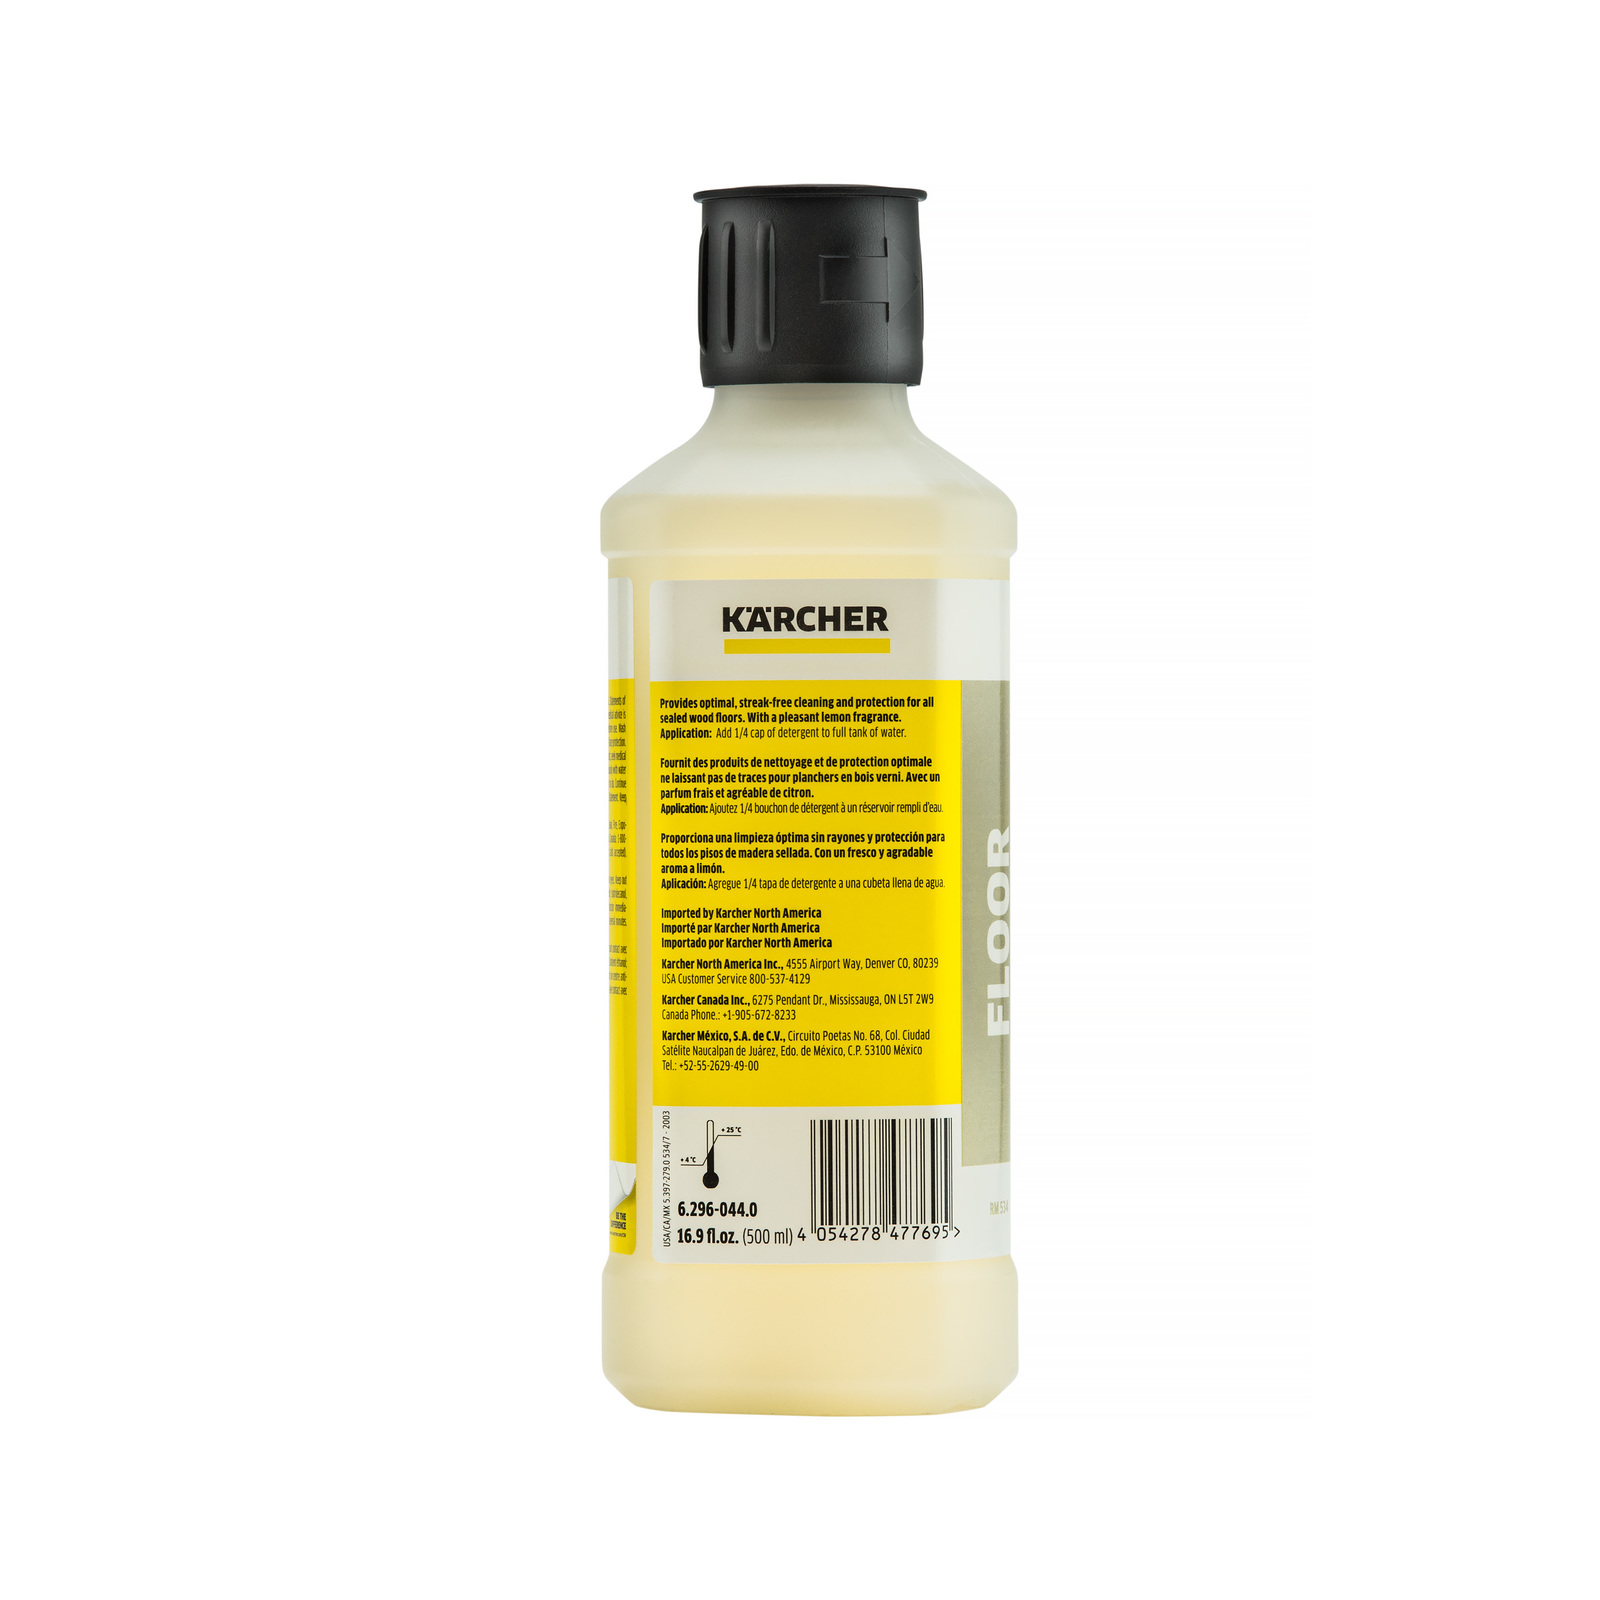 Karcher FC5 Hard Floor Cleaner with a 3 year warranty Buy Direct from a  Karcher Center